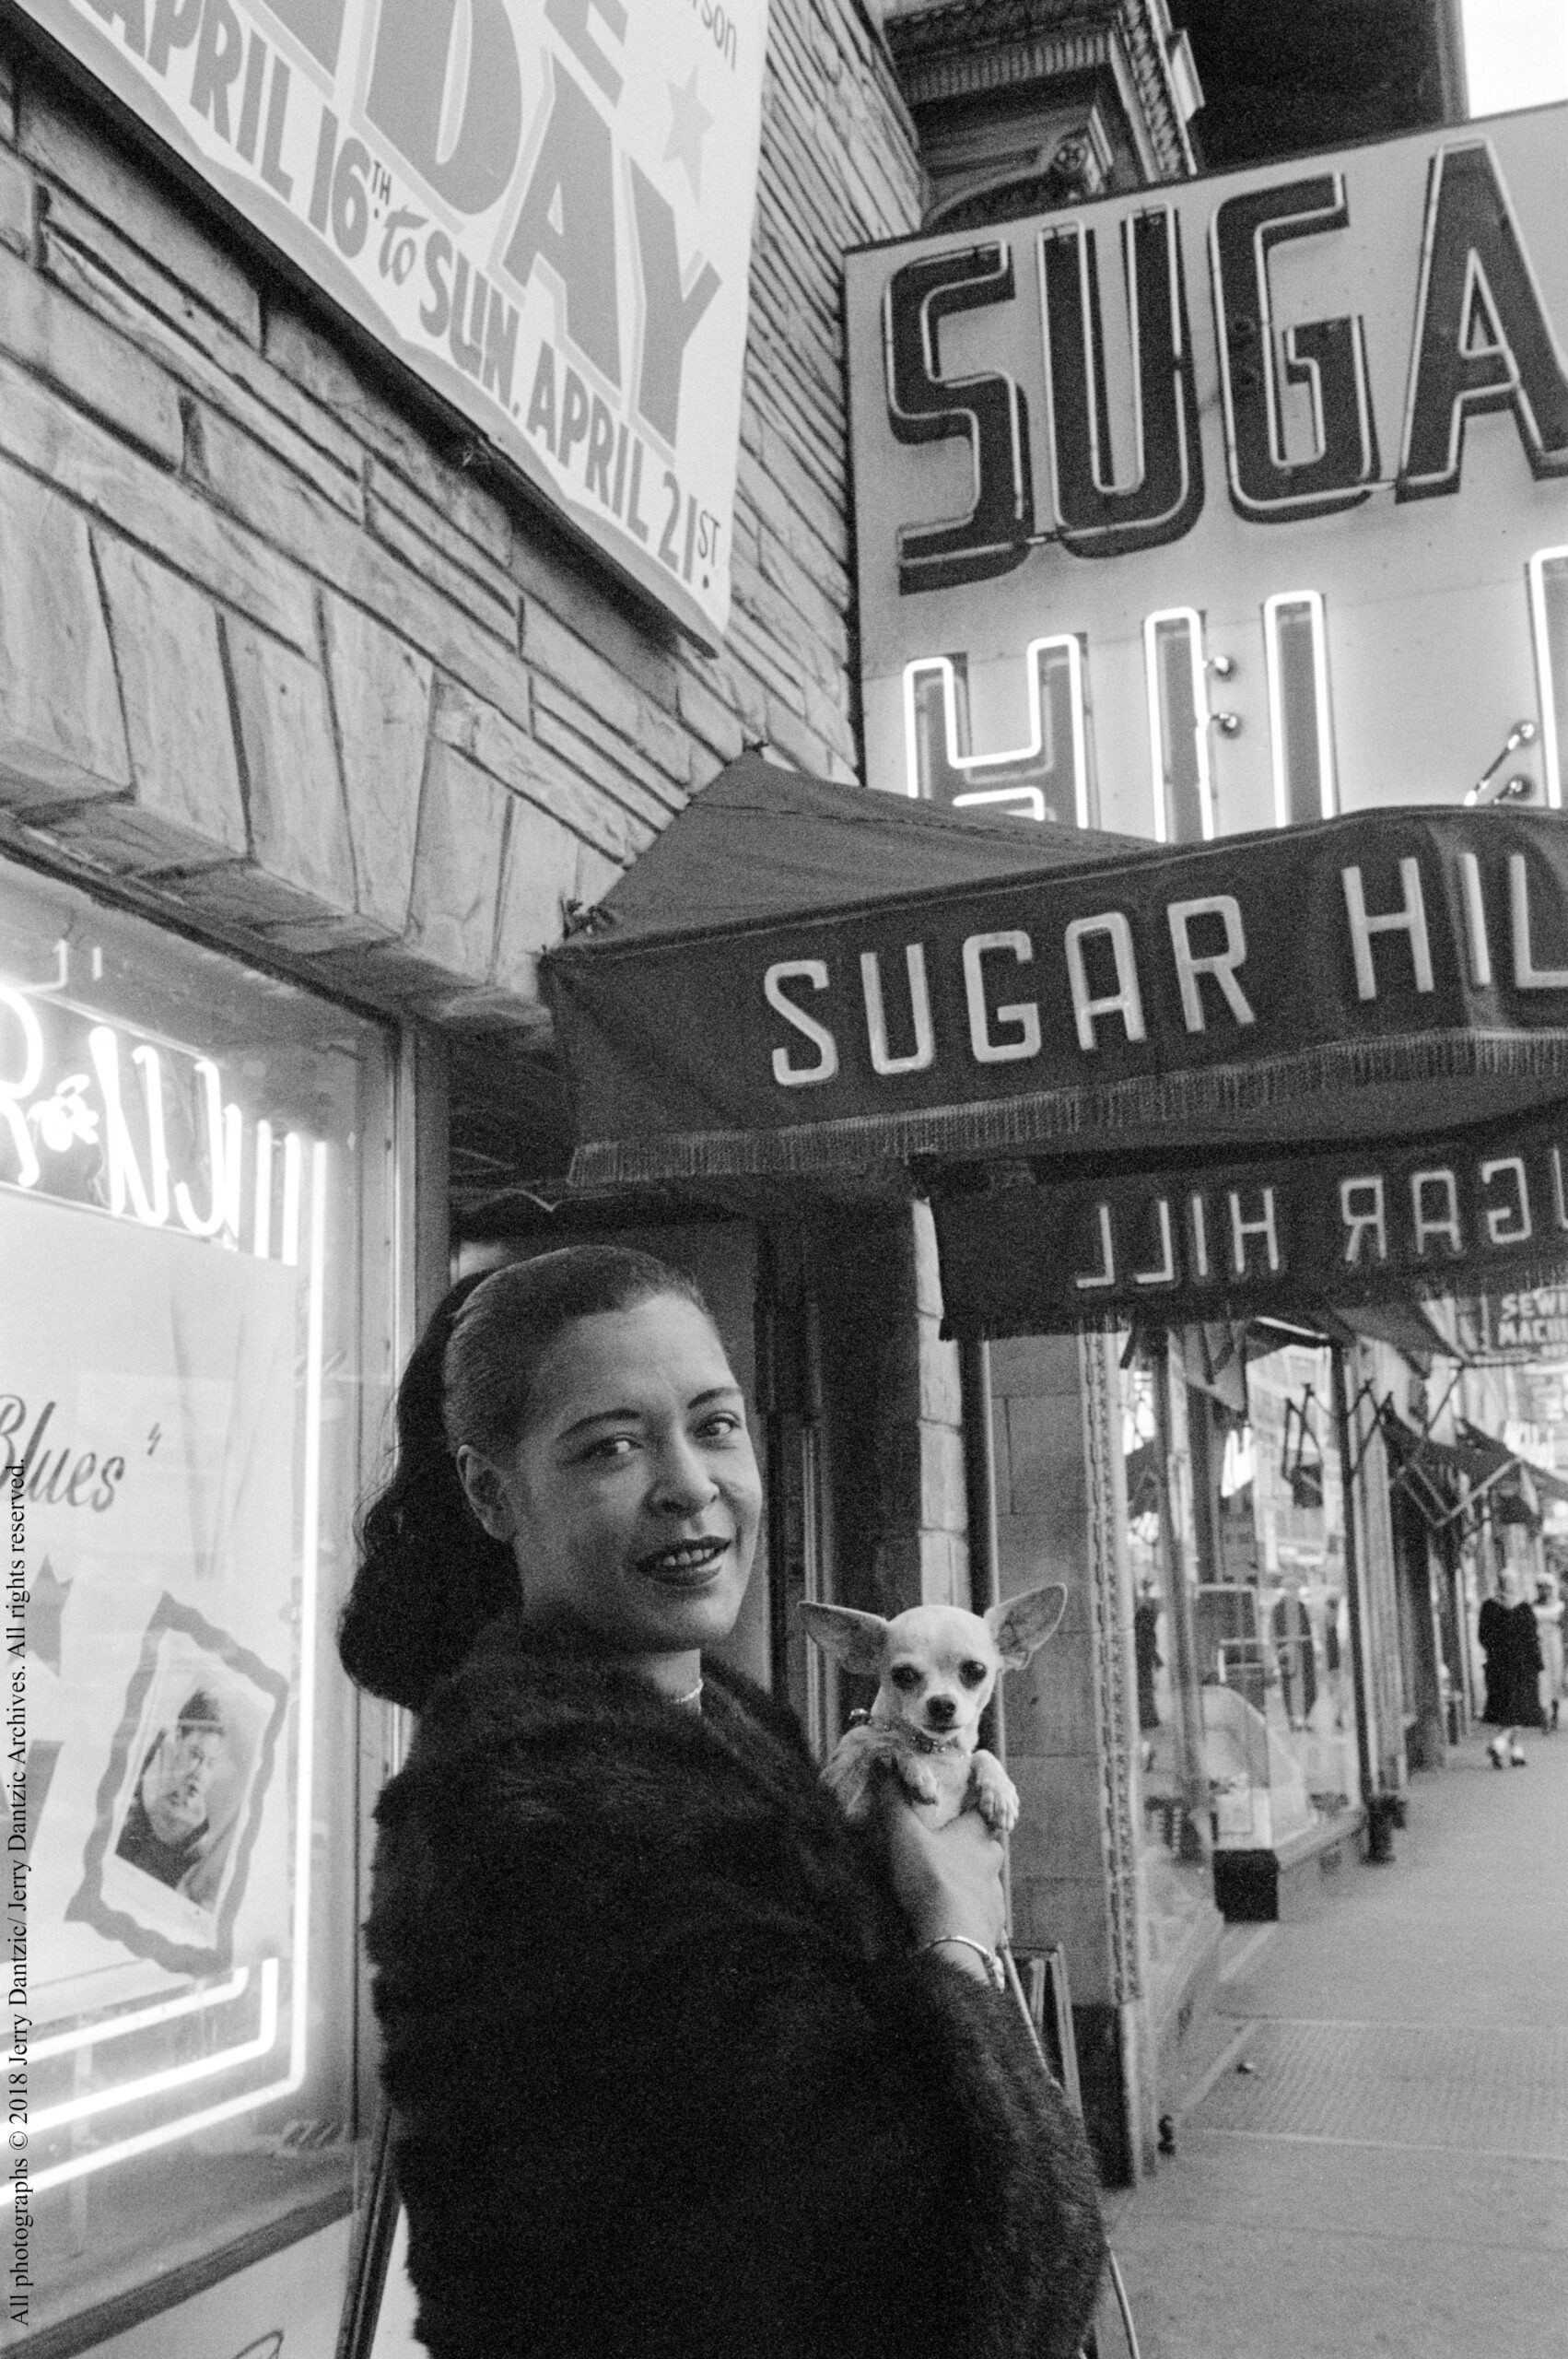 Billie Holiday holding her pet Chihuahua, Pepi, in front of Sugar Hill, Newark, New Jersey, April 18, 1957 All photographs © 2018 Jerry Dantzic/ Jerry Dantzic Archives. All rights reserved.